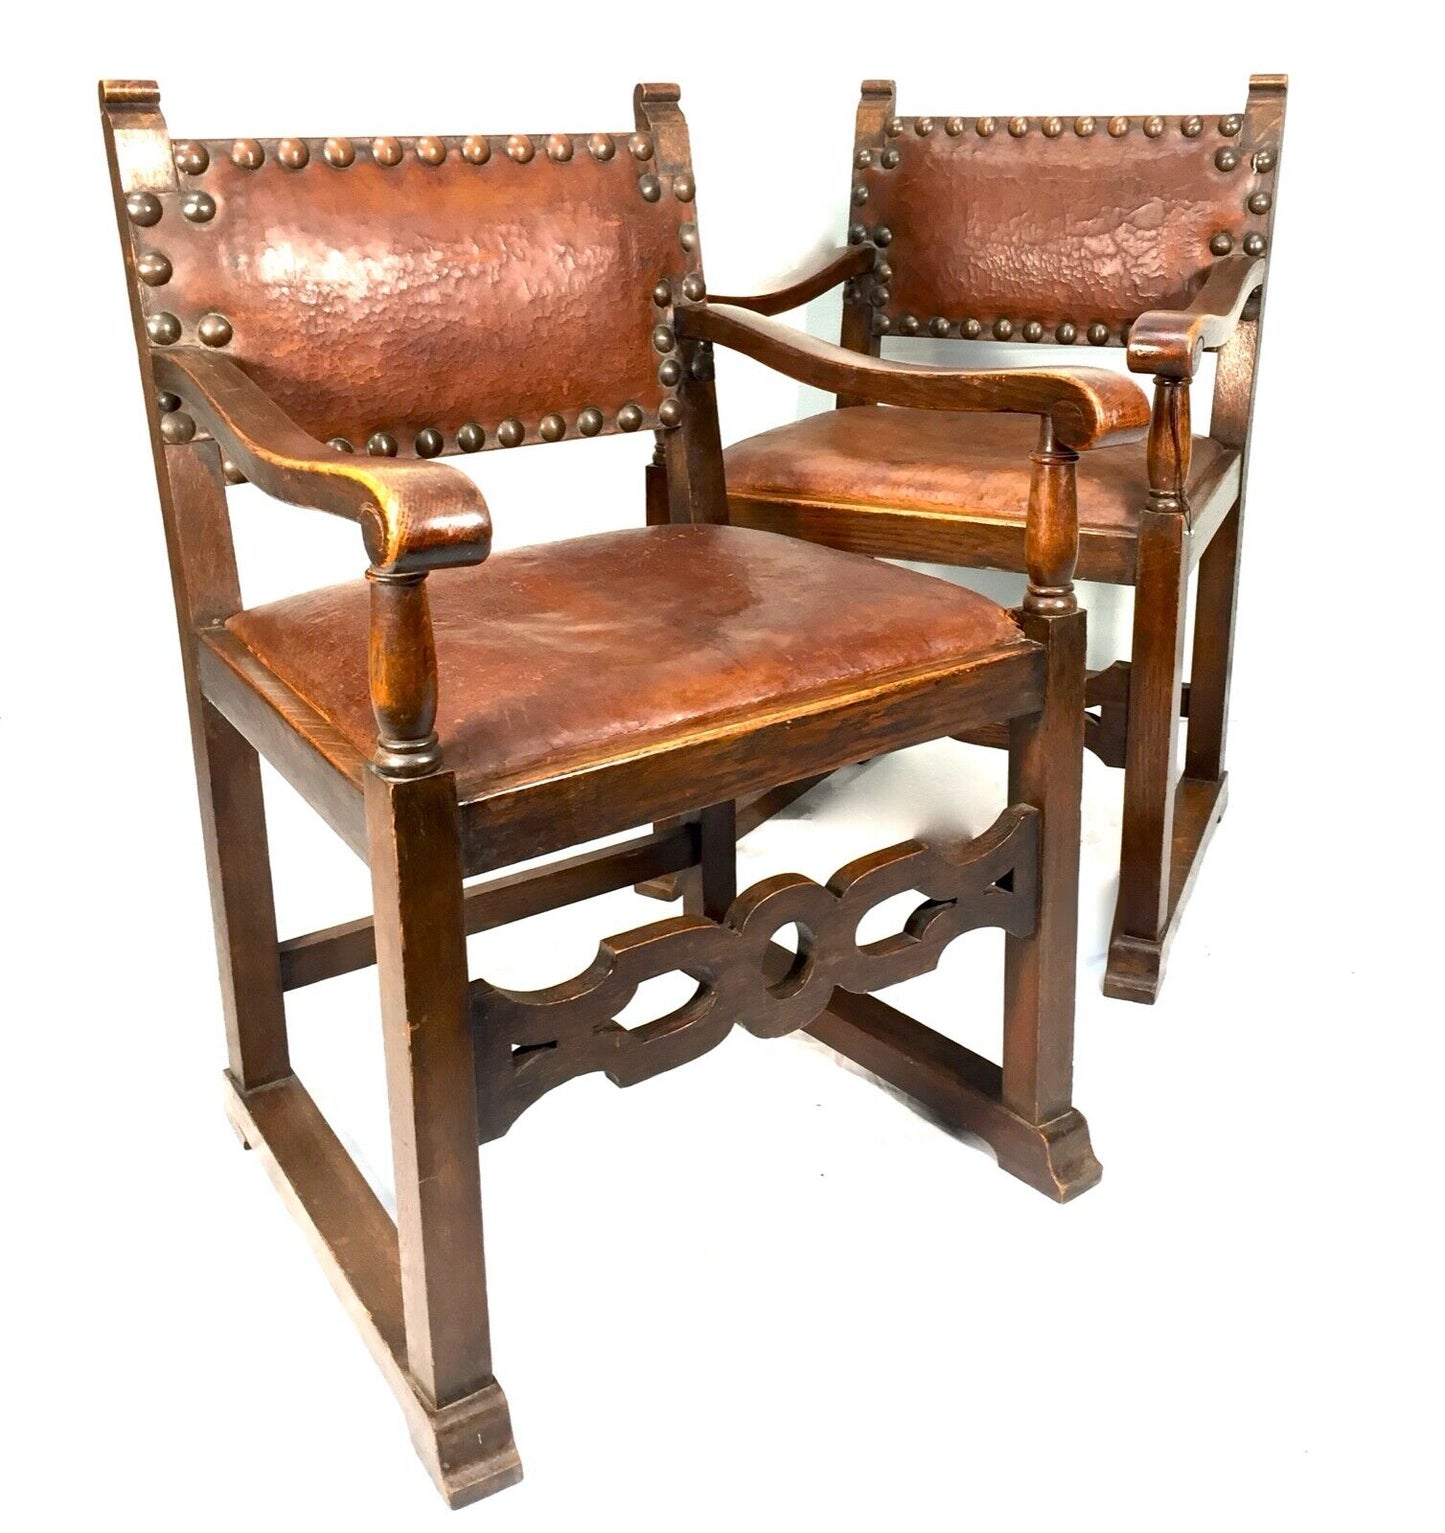 Antique Pair of Edwardian Oak & Leather Hall Chairs / Library / Office c.1900